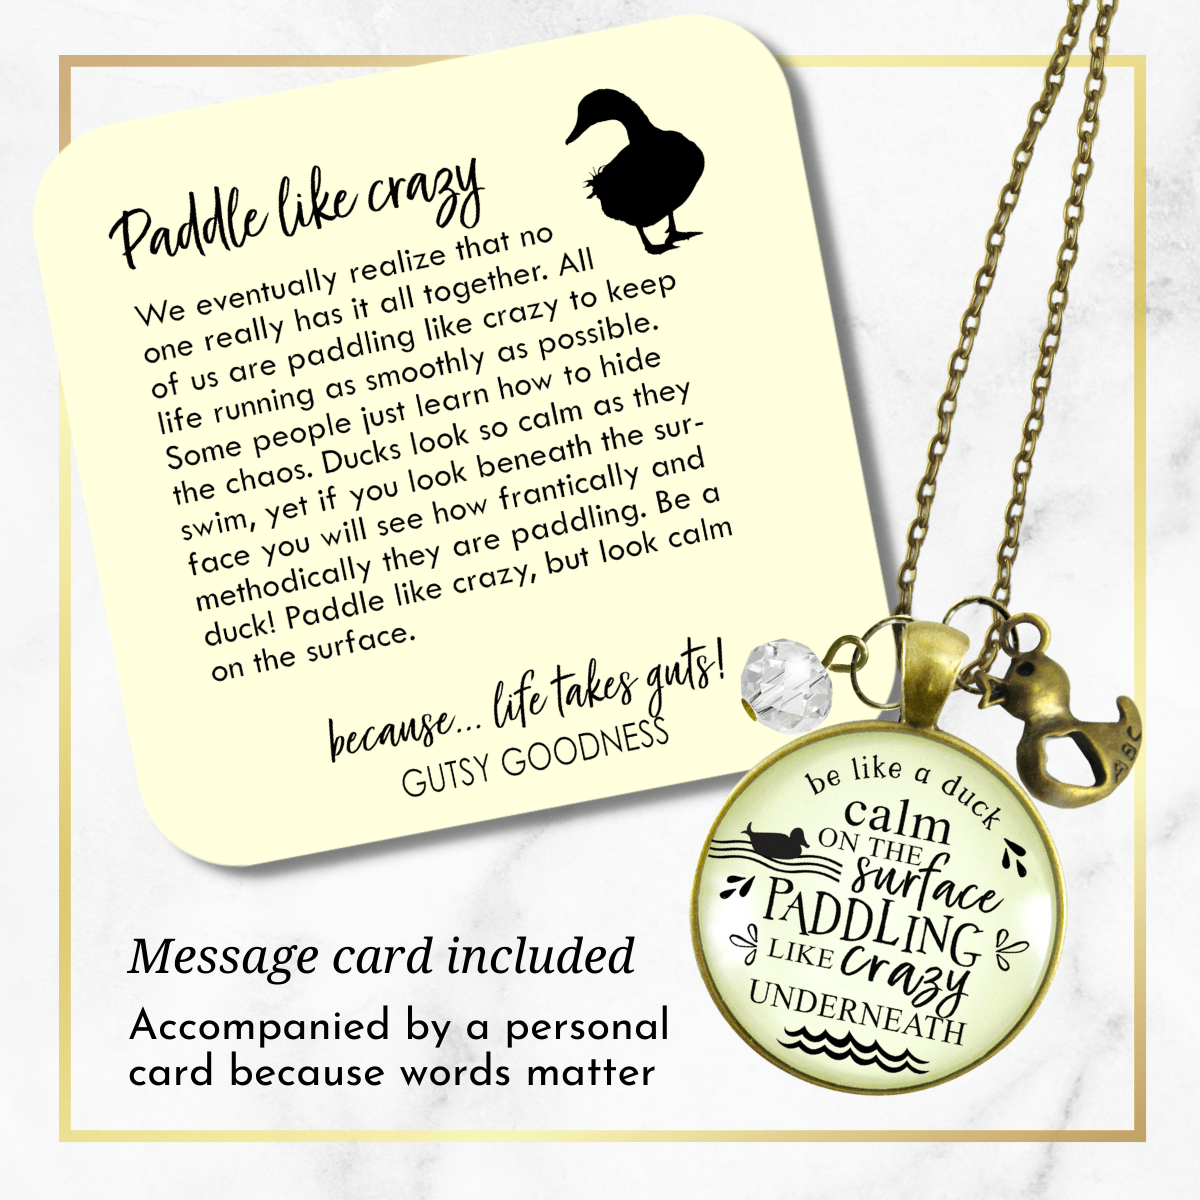 Gutsy Goodness Inspirational Necklace Be a Duck Calm Hustle Mantra Boss Jewelry Gift - Gutsy Goodness Handmade Jewelry;Inspirational Necklace Be A Duck Calm Hustle Mantra Boss Jewelry Gift - Gutsy Goodness Handmade Jewelry Gifts